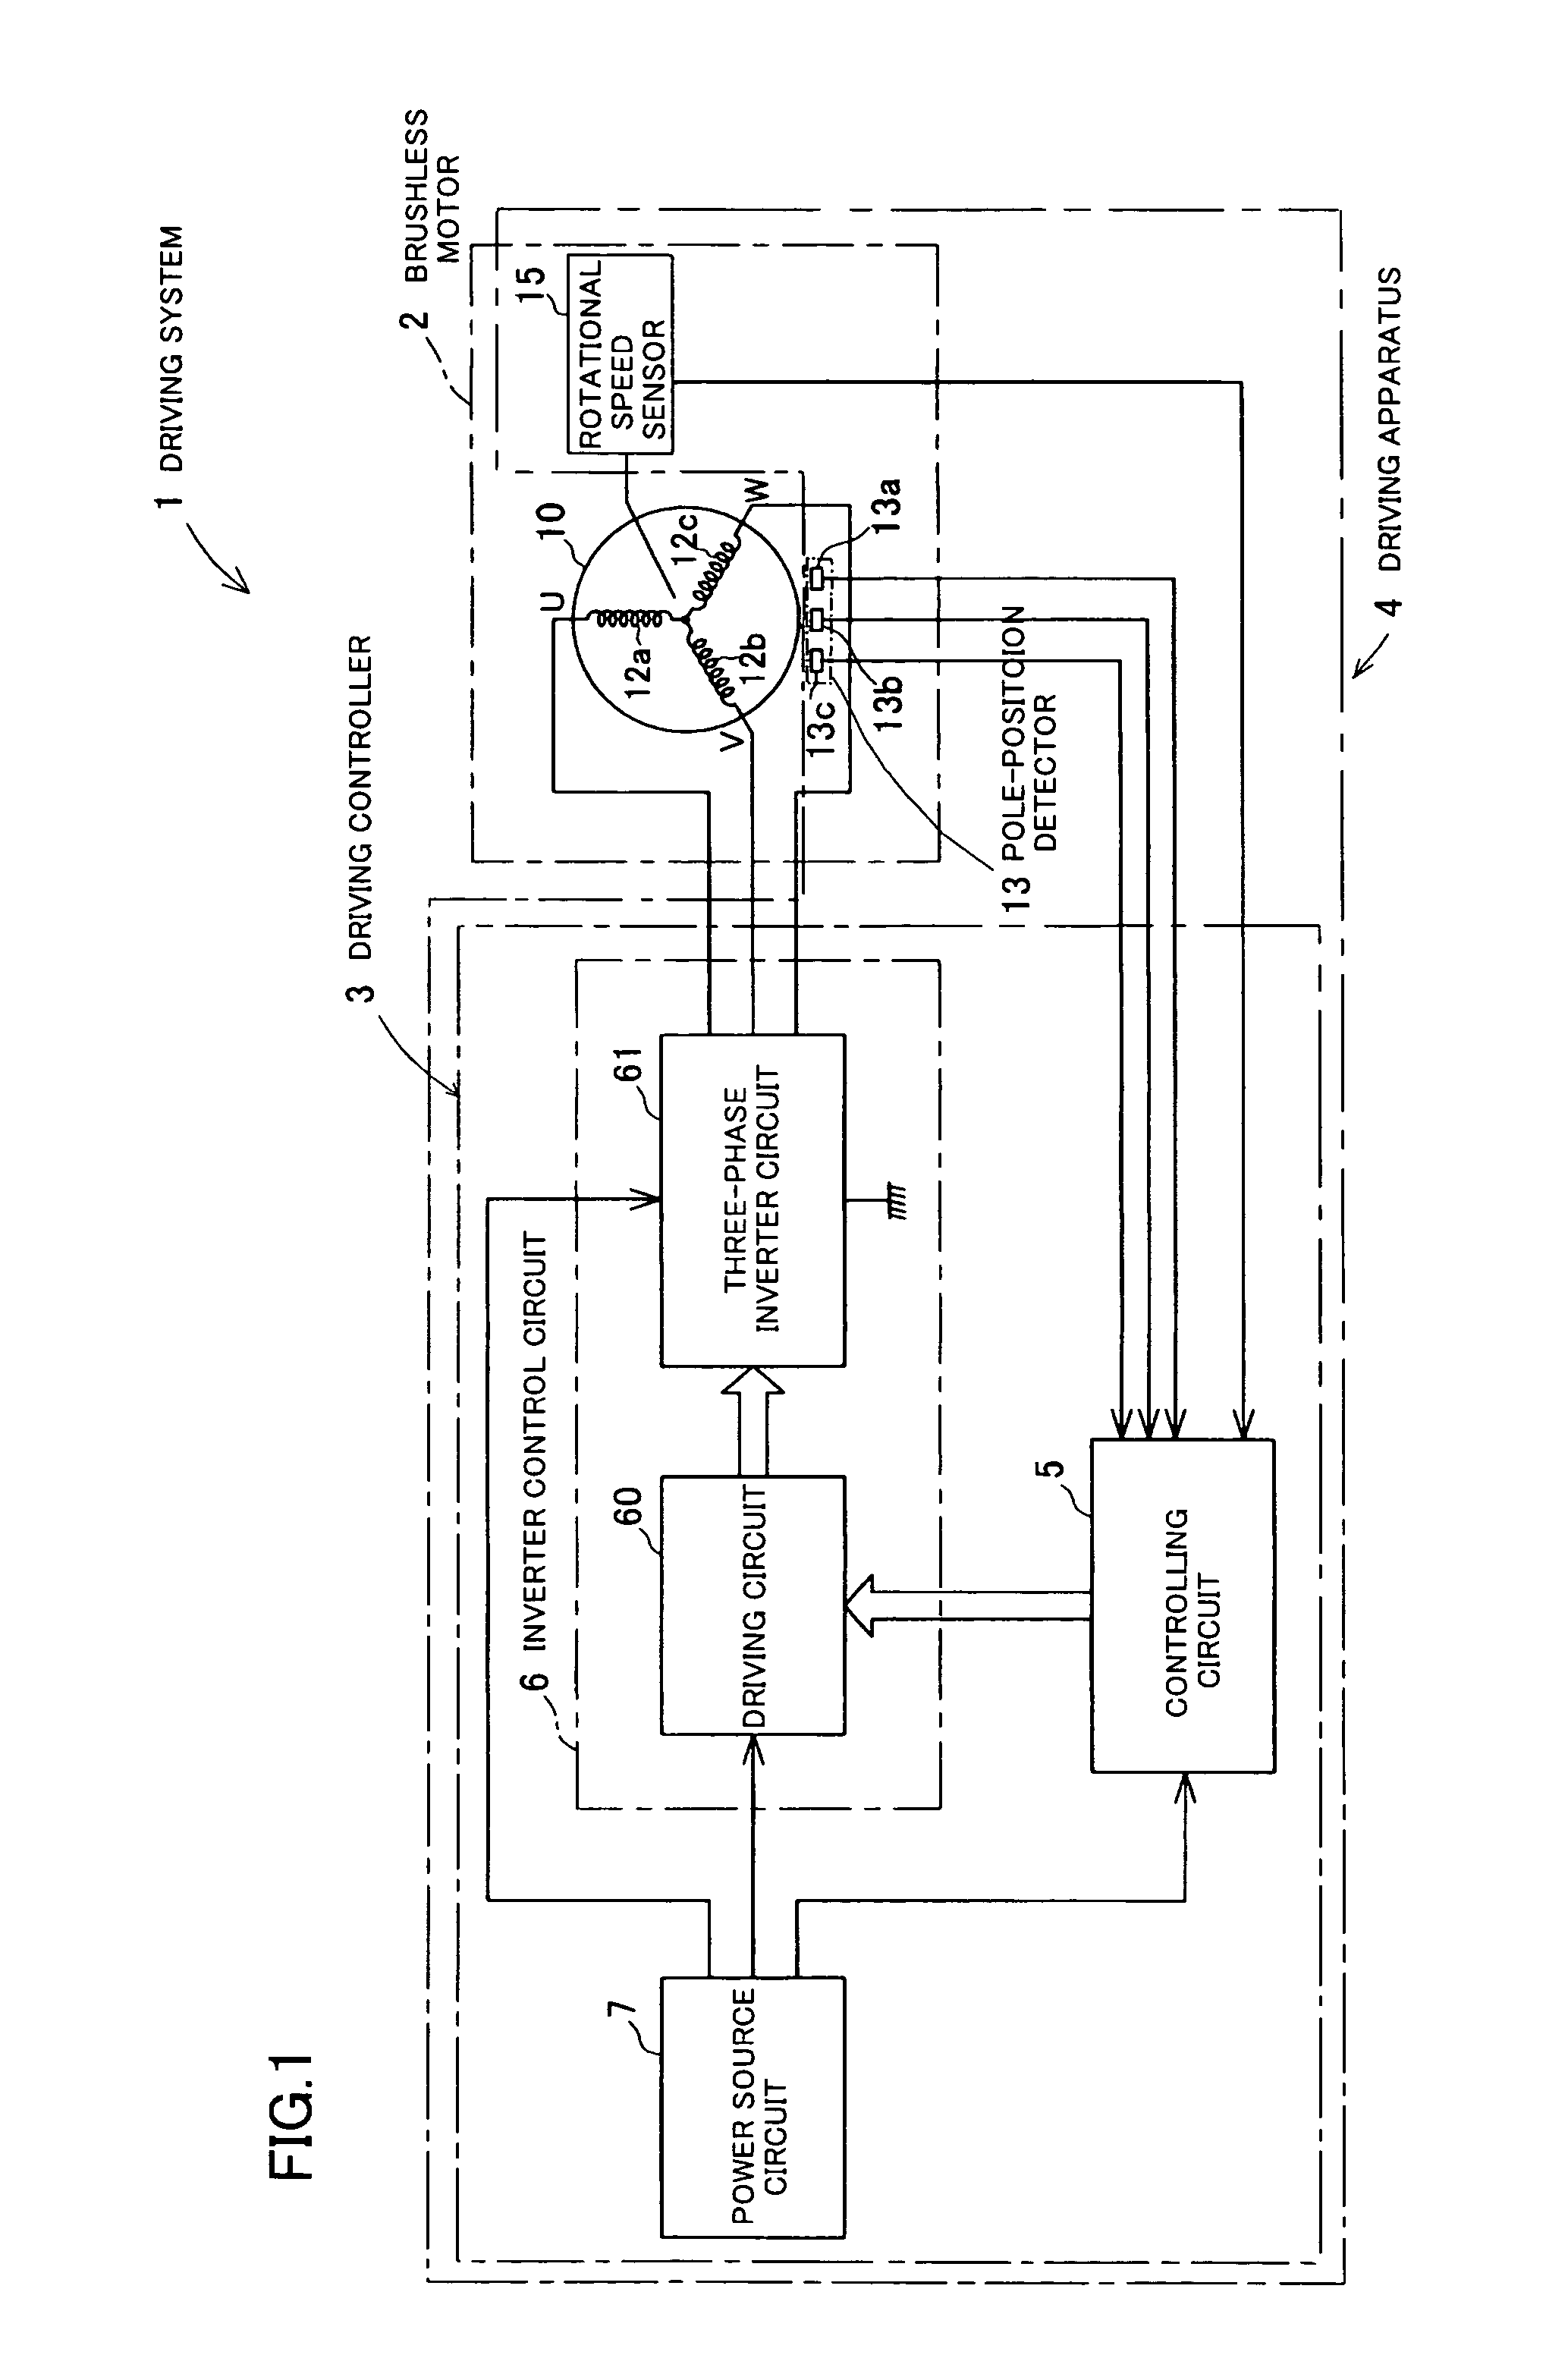 Driving apparatus for driving a brushless motor